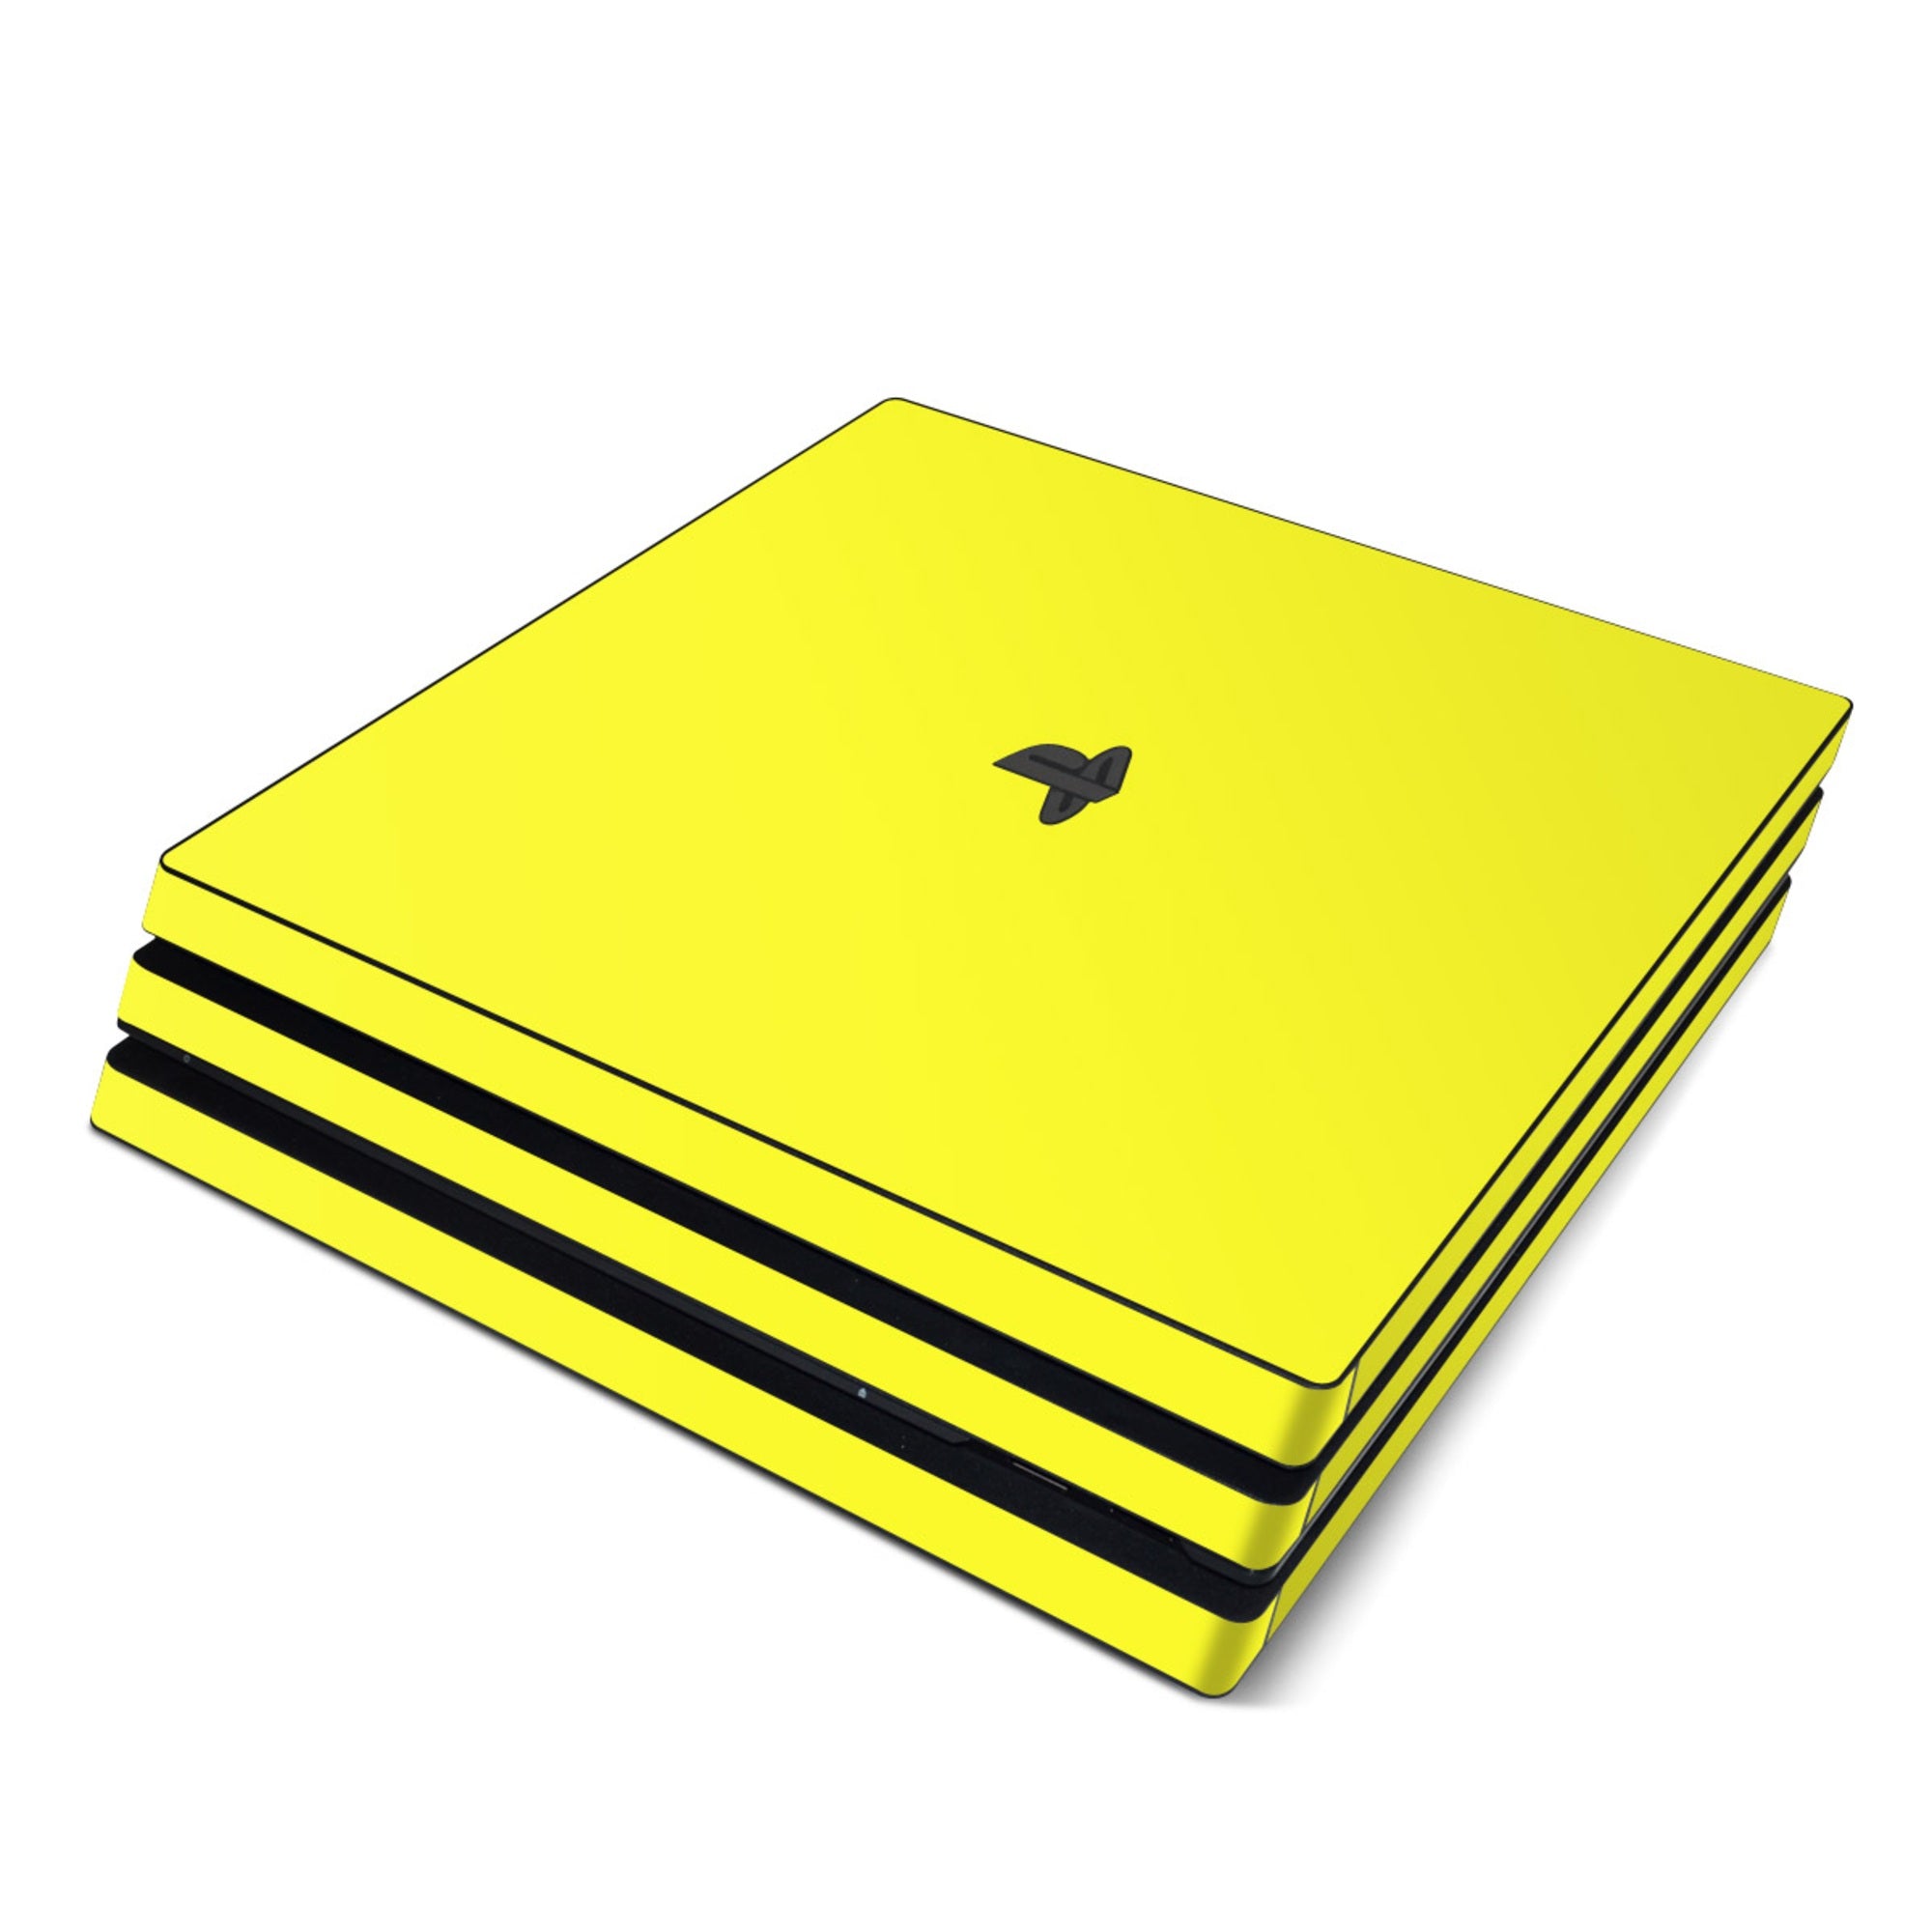 Solid State Lemon - Sony PS4 Pro Skin